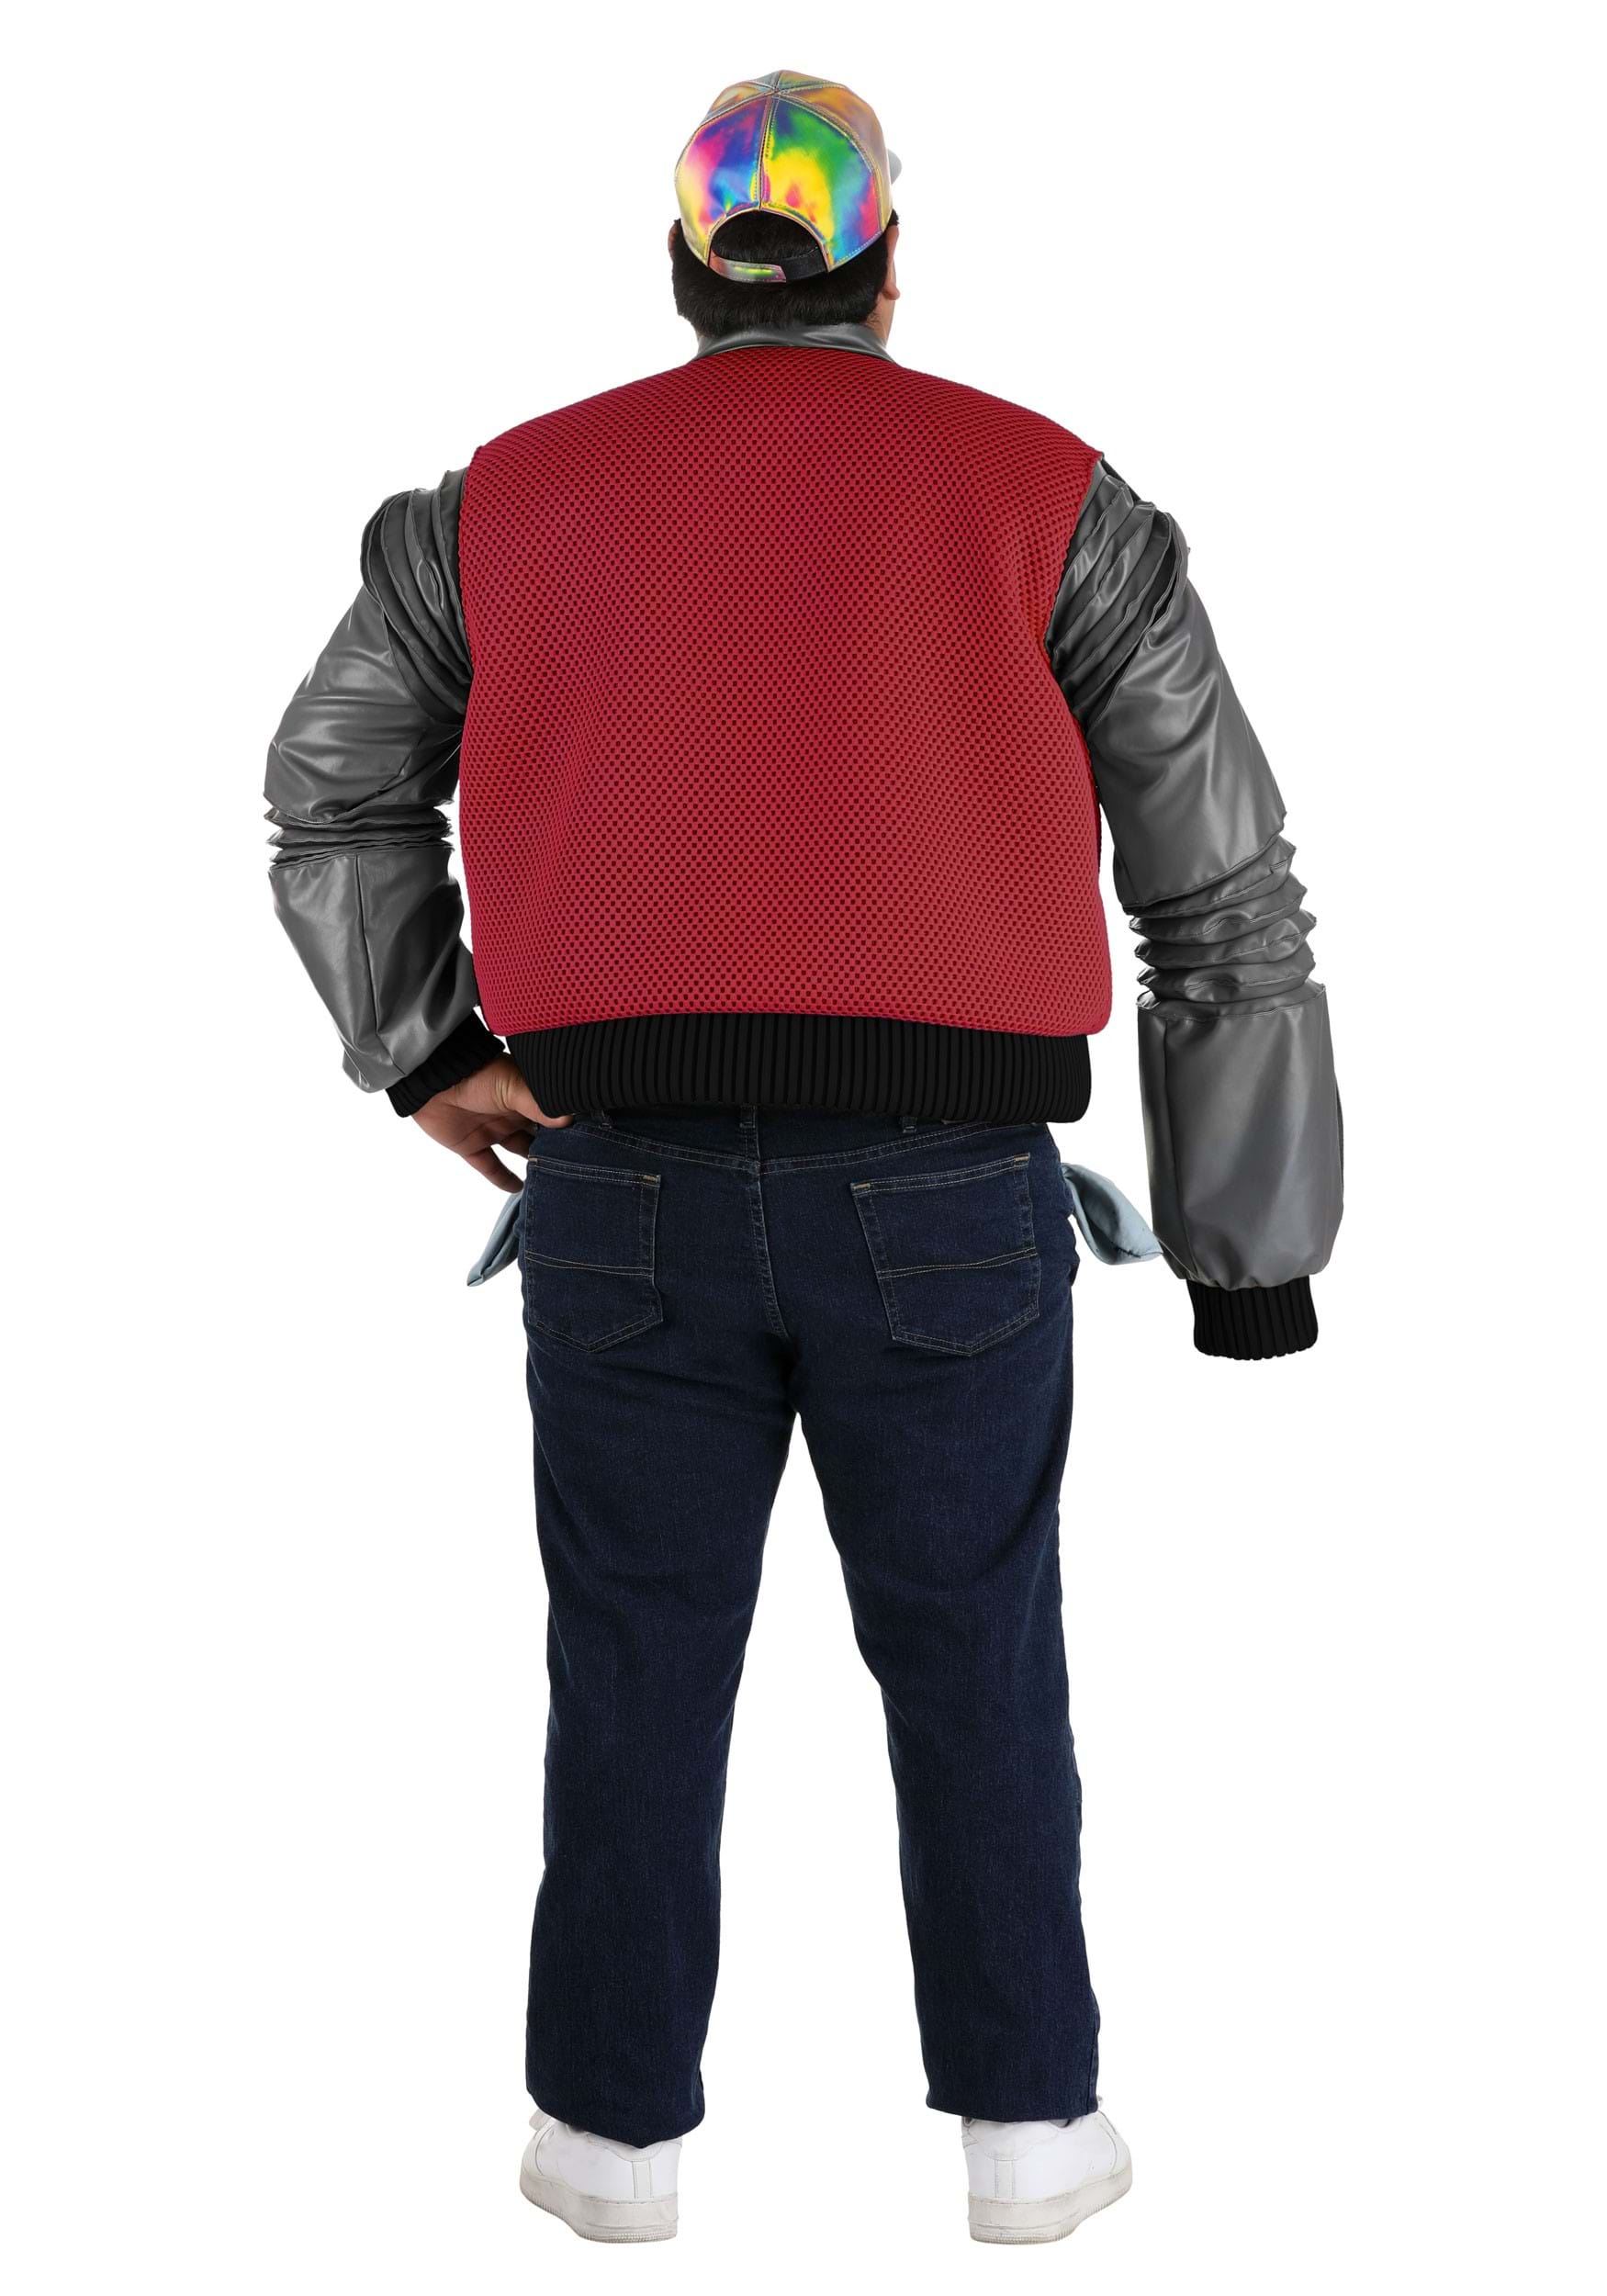 marty mcfly future costume